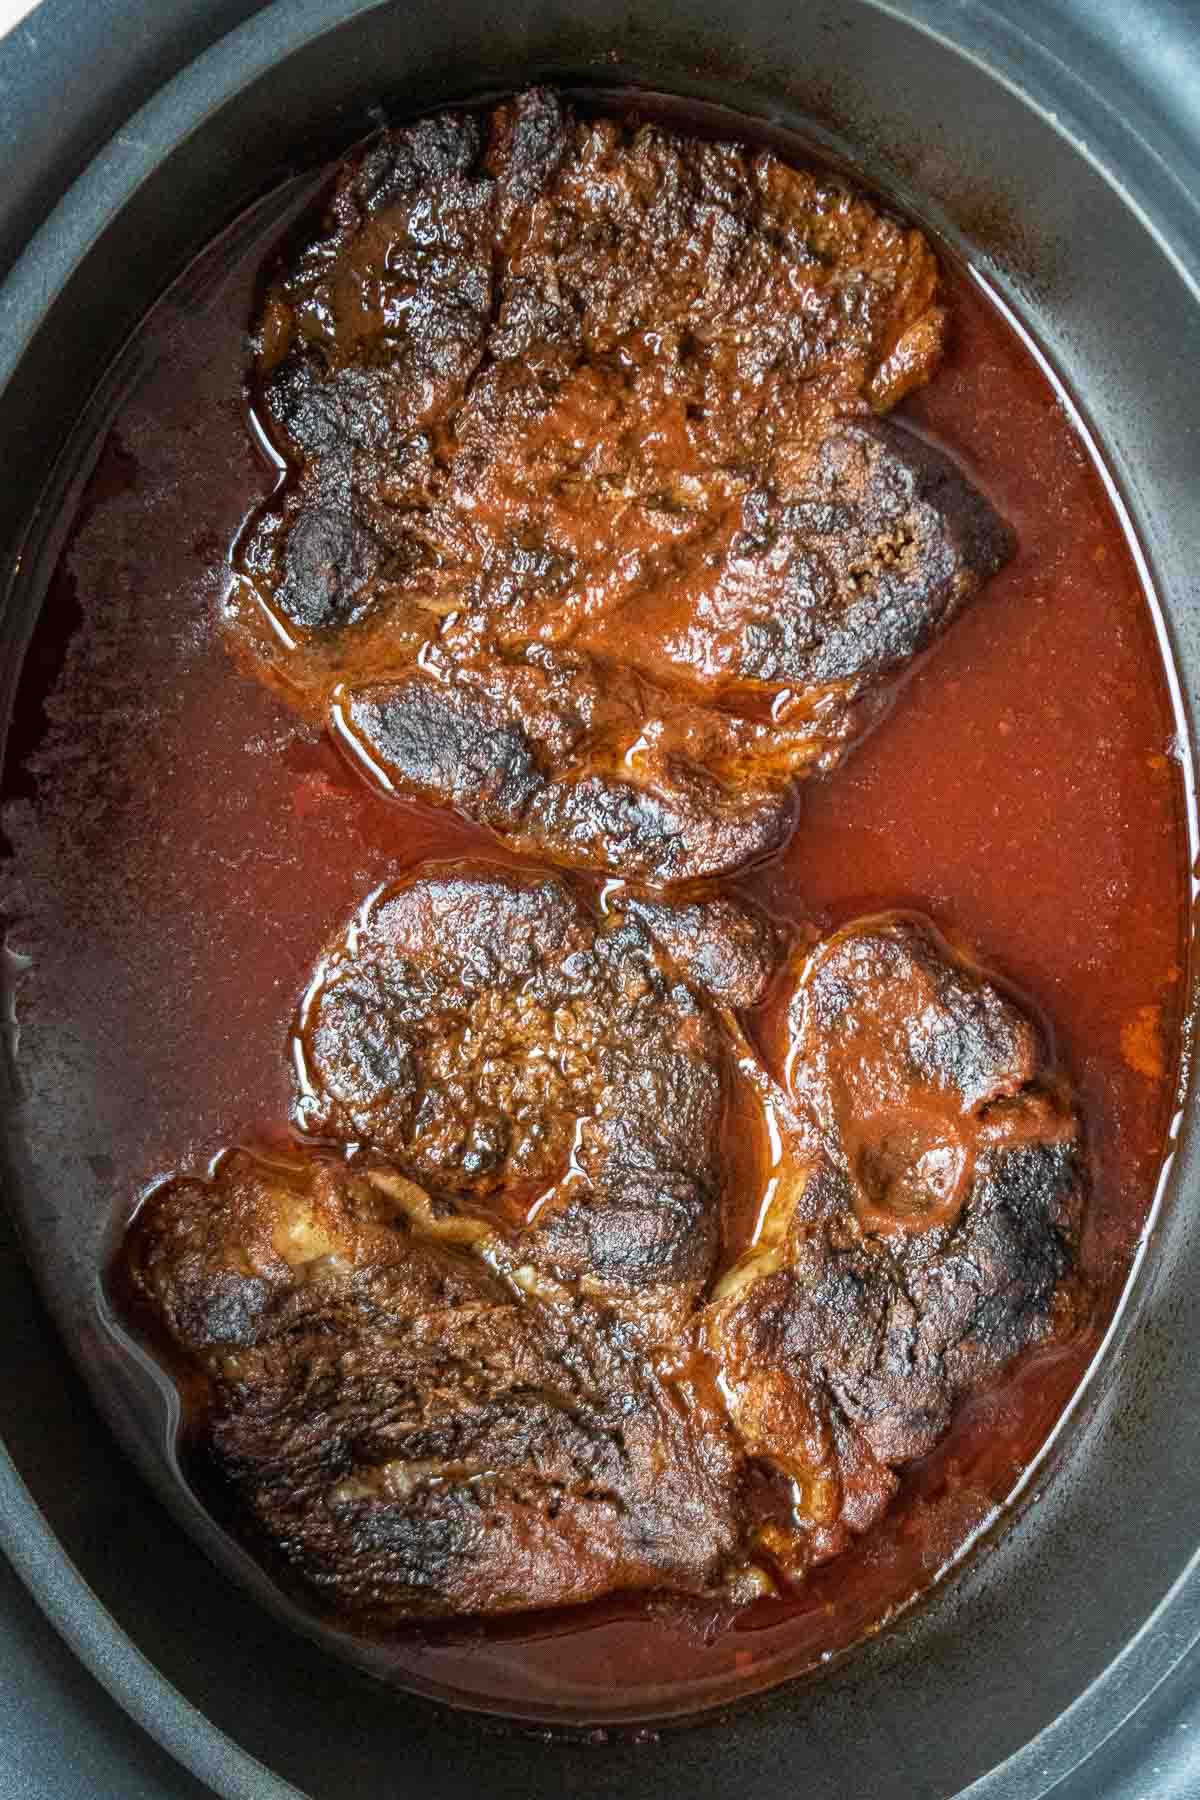 Cooked beef chuck roast in a slow cooker.